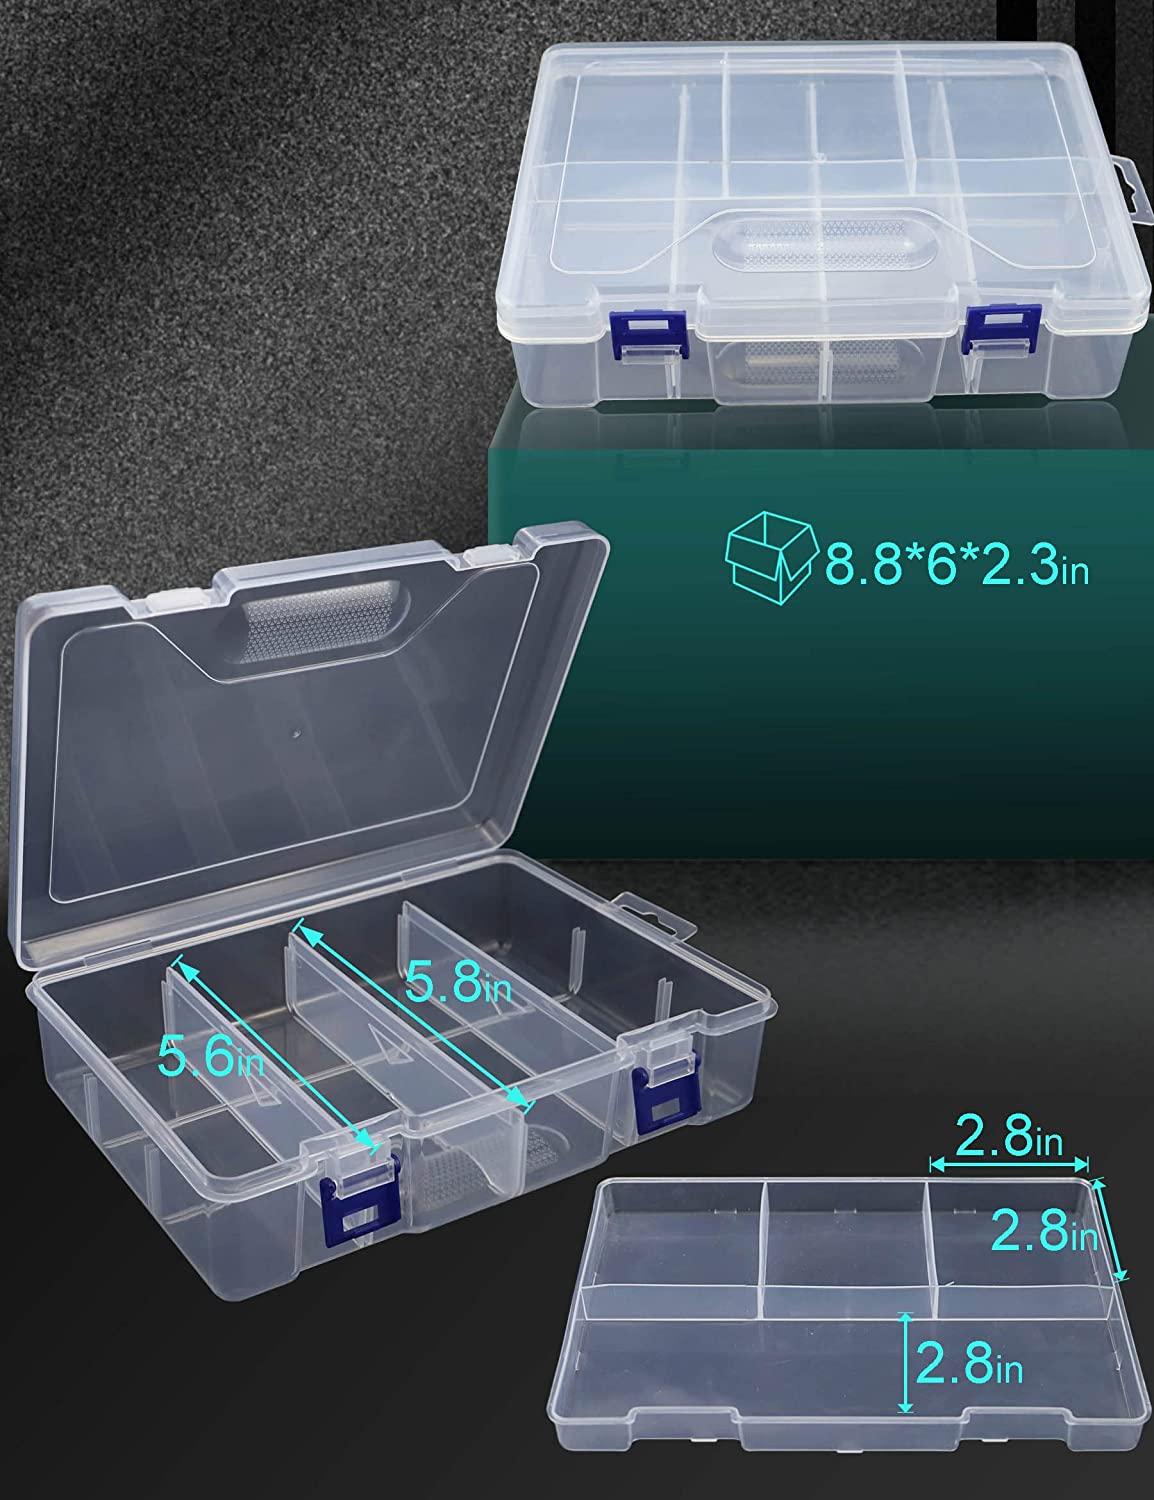 6 Pack Tackle Box Fishing Tackle Box Organizer Storage, Clear Fishing Box  Organizer with Movable Tray, Plastic Waterproof Compartment Organizer Box